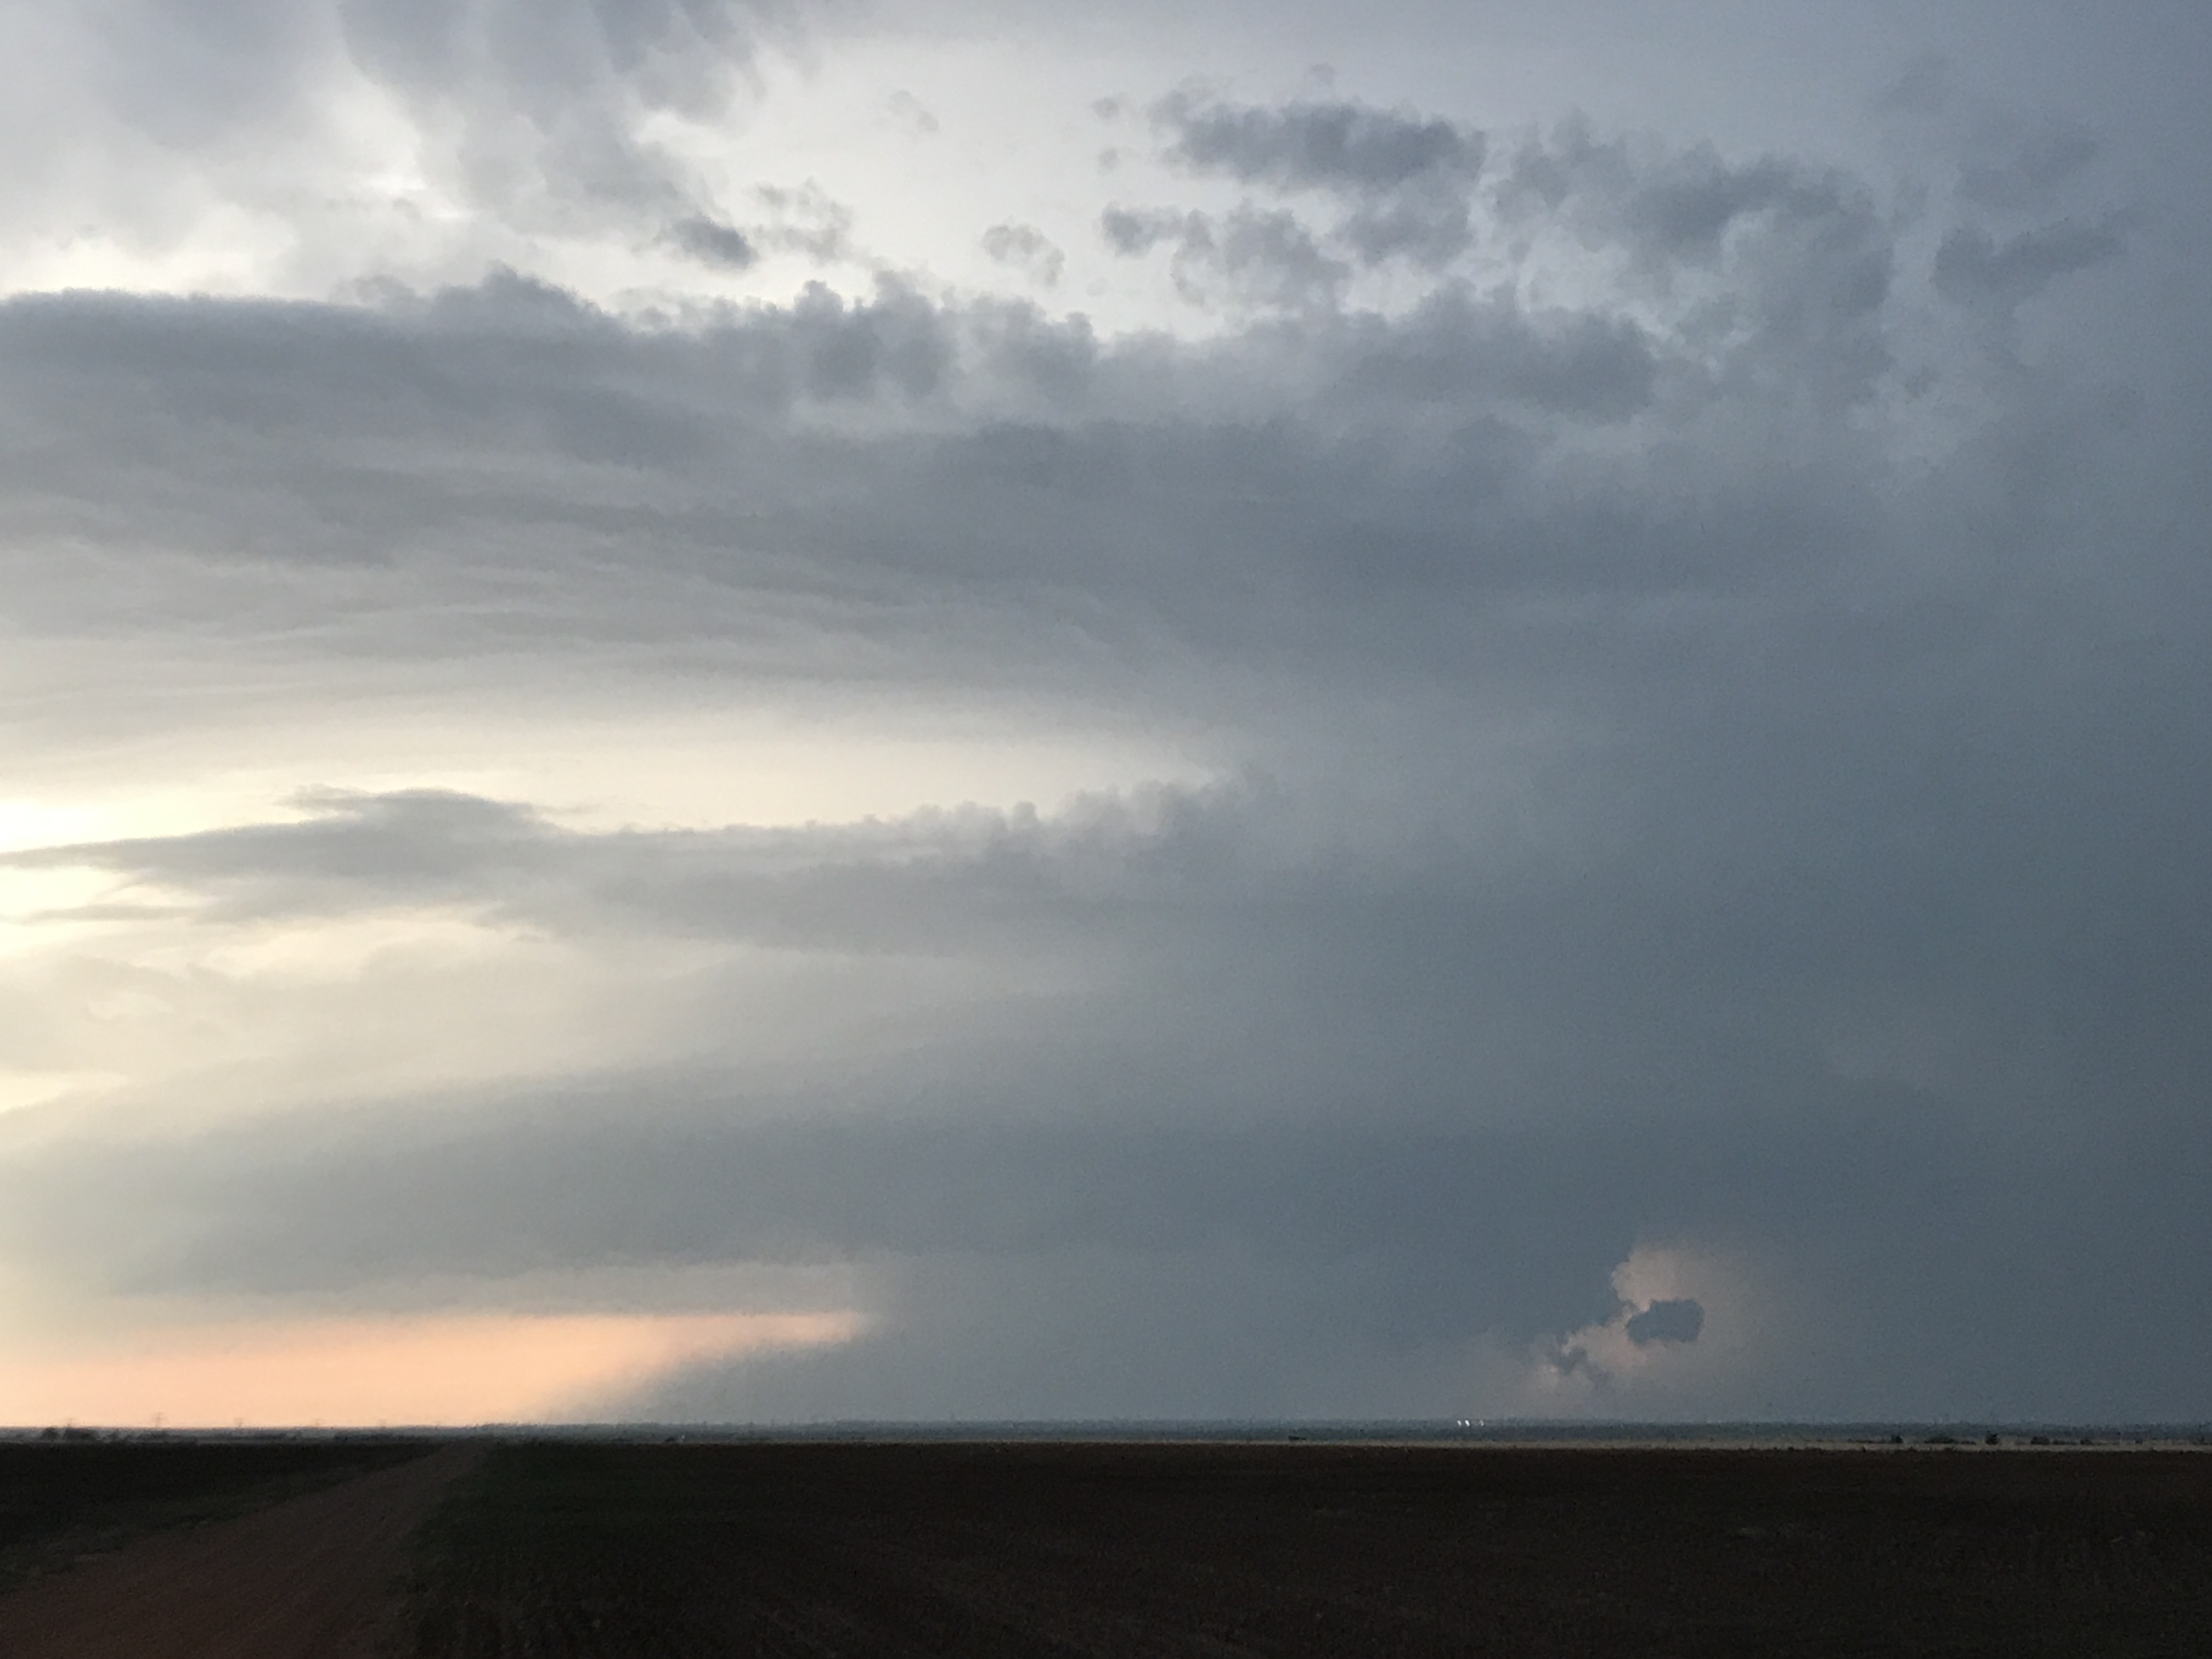 Supercell thunderstorm west of Childress on the evening of Sunday, 13 May 2018. The picture is courtesy of Bruce Haynie.